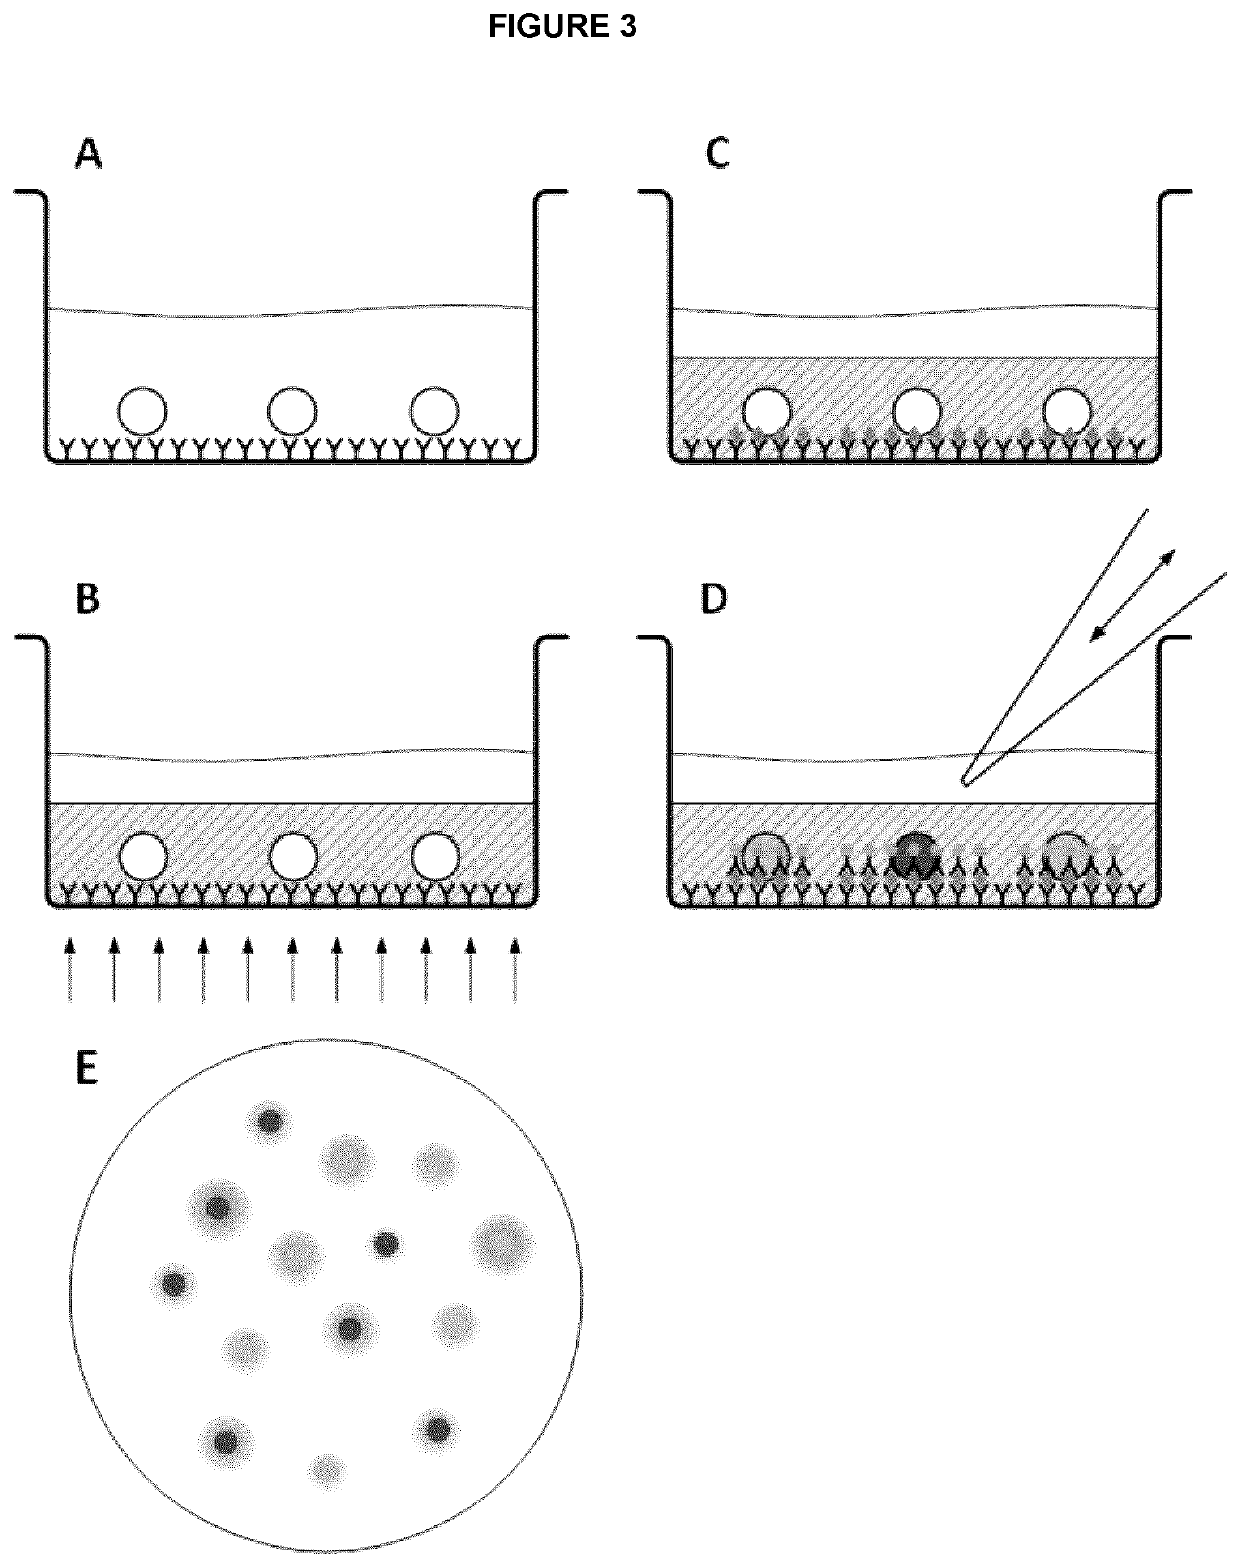 Cell encapsulation compositions and methods for immunocytochemistry